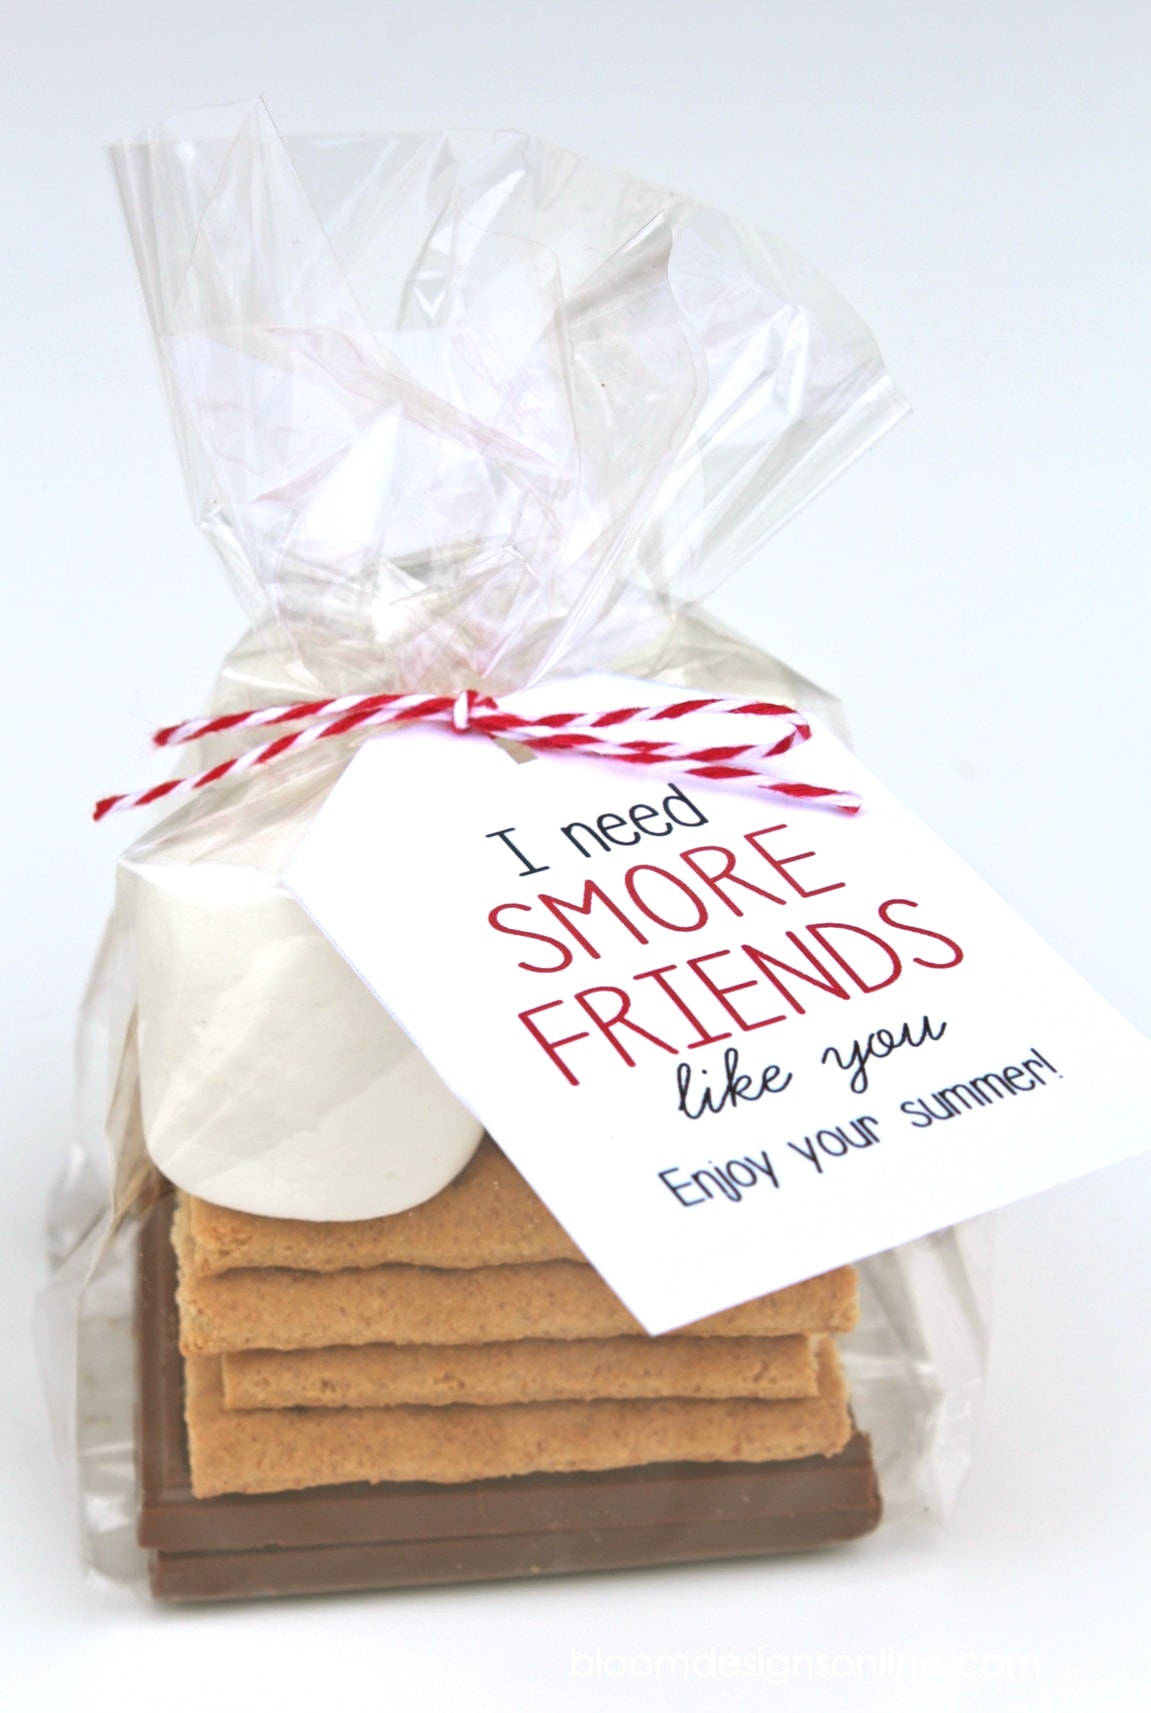 Cute End of the School Year Gift for Friends - I need Smore Friends like you! Free print on { lilluna.com } All your friend needs to make a delicious smore.